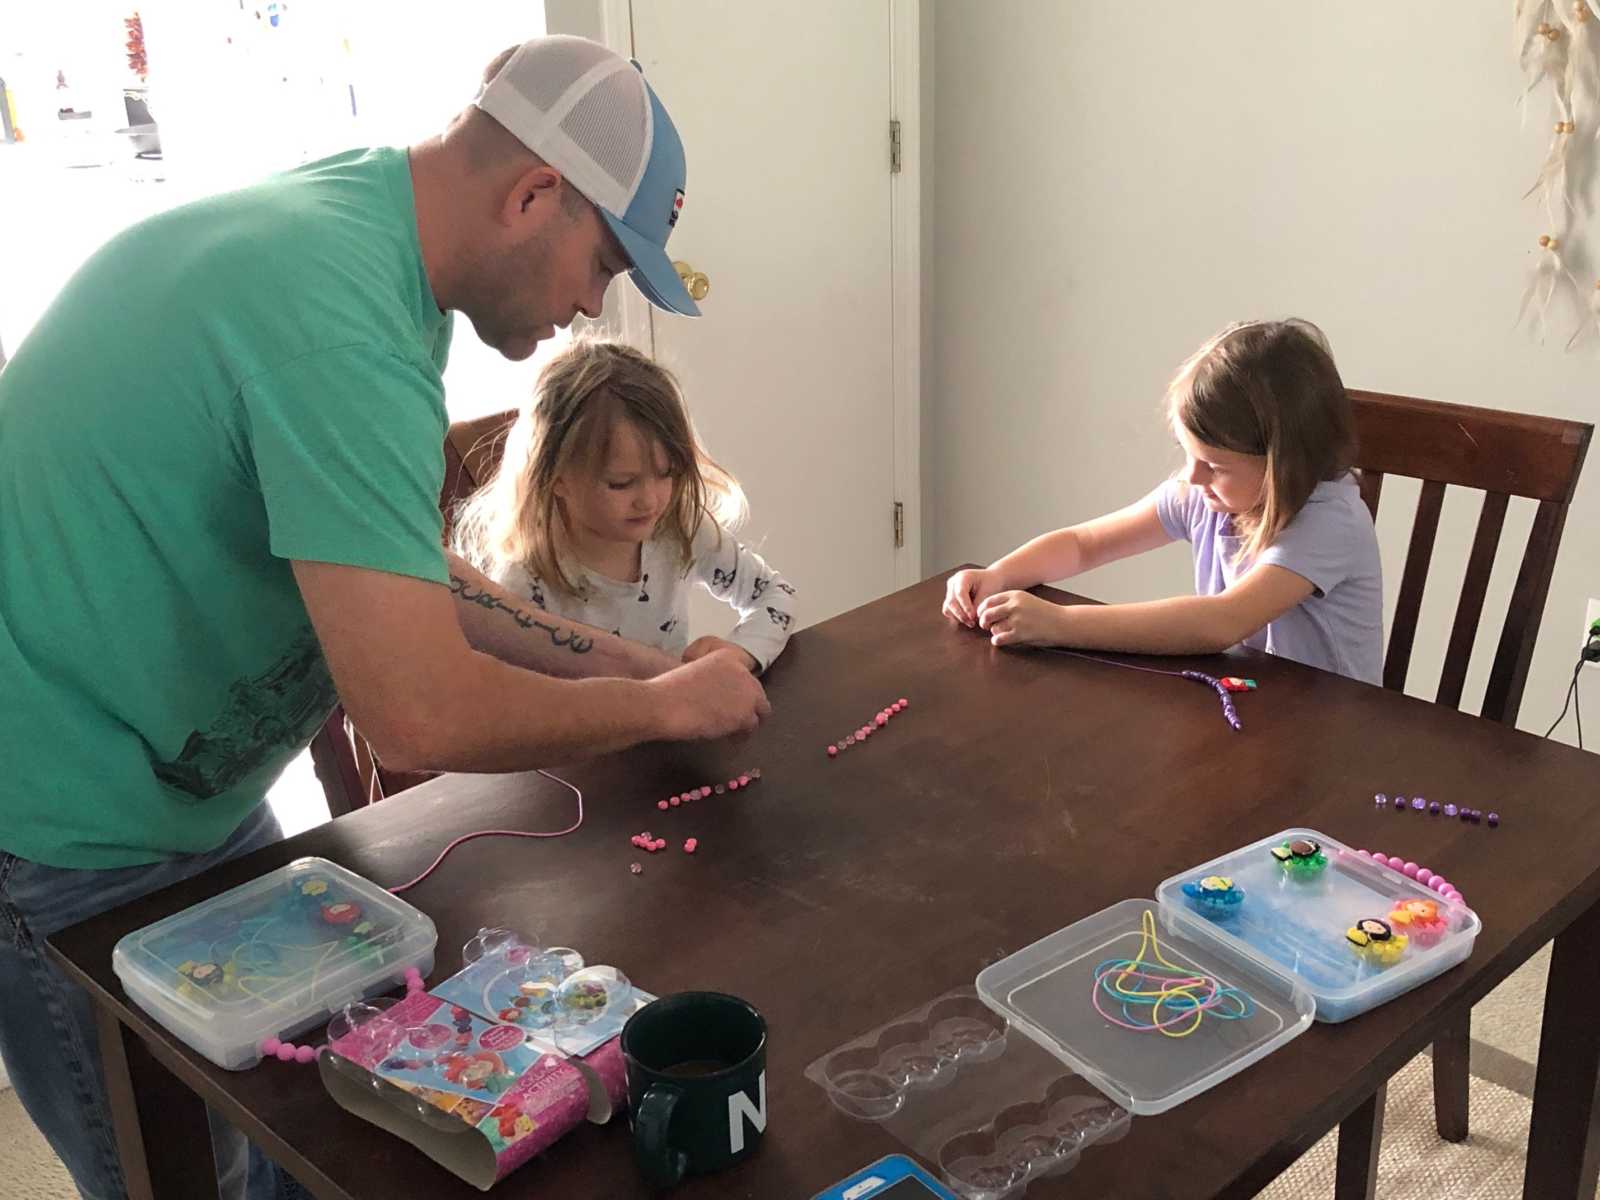 man leans over table to help stepdaughter make a bracelet while other stepdaughter sits across table making her own bracelet